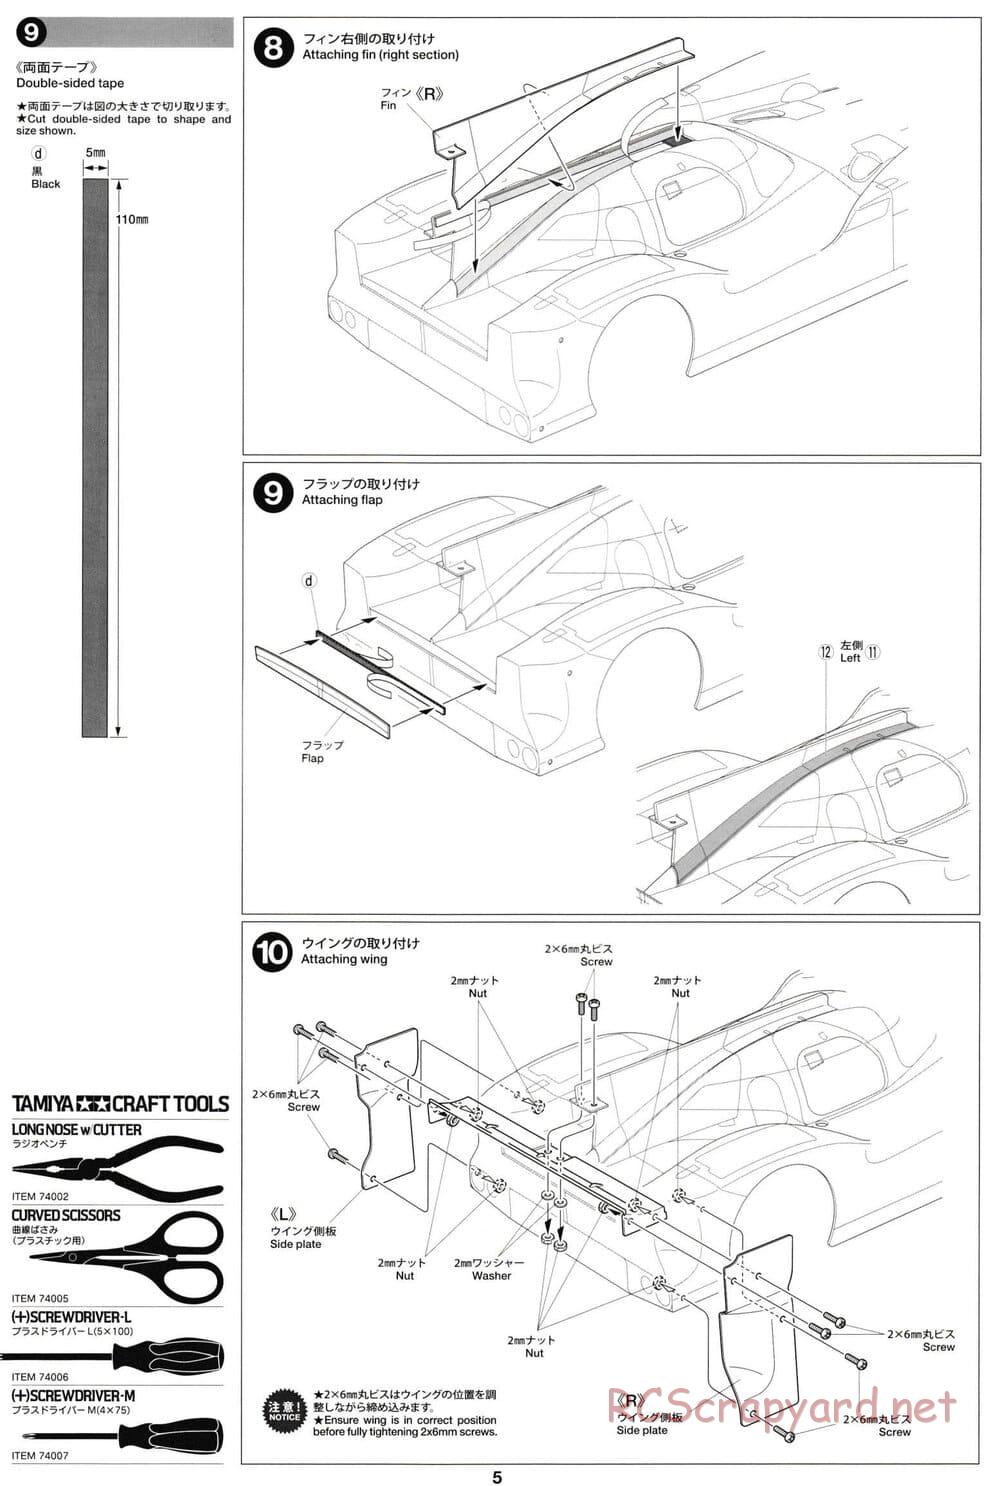 Tamiya - Nissan GT-R LM Nismo Launch Version - F103GT Chassis - Body Manual - Page 5